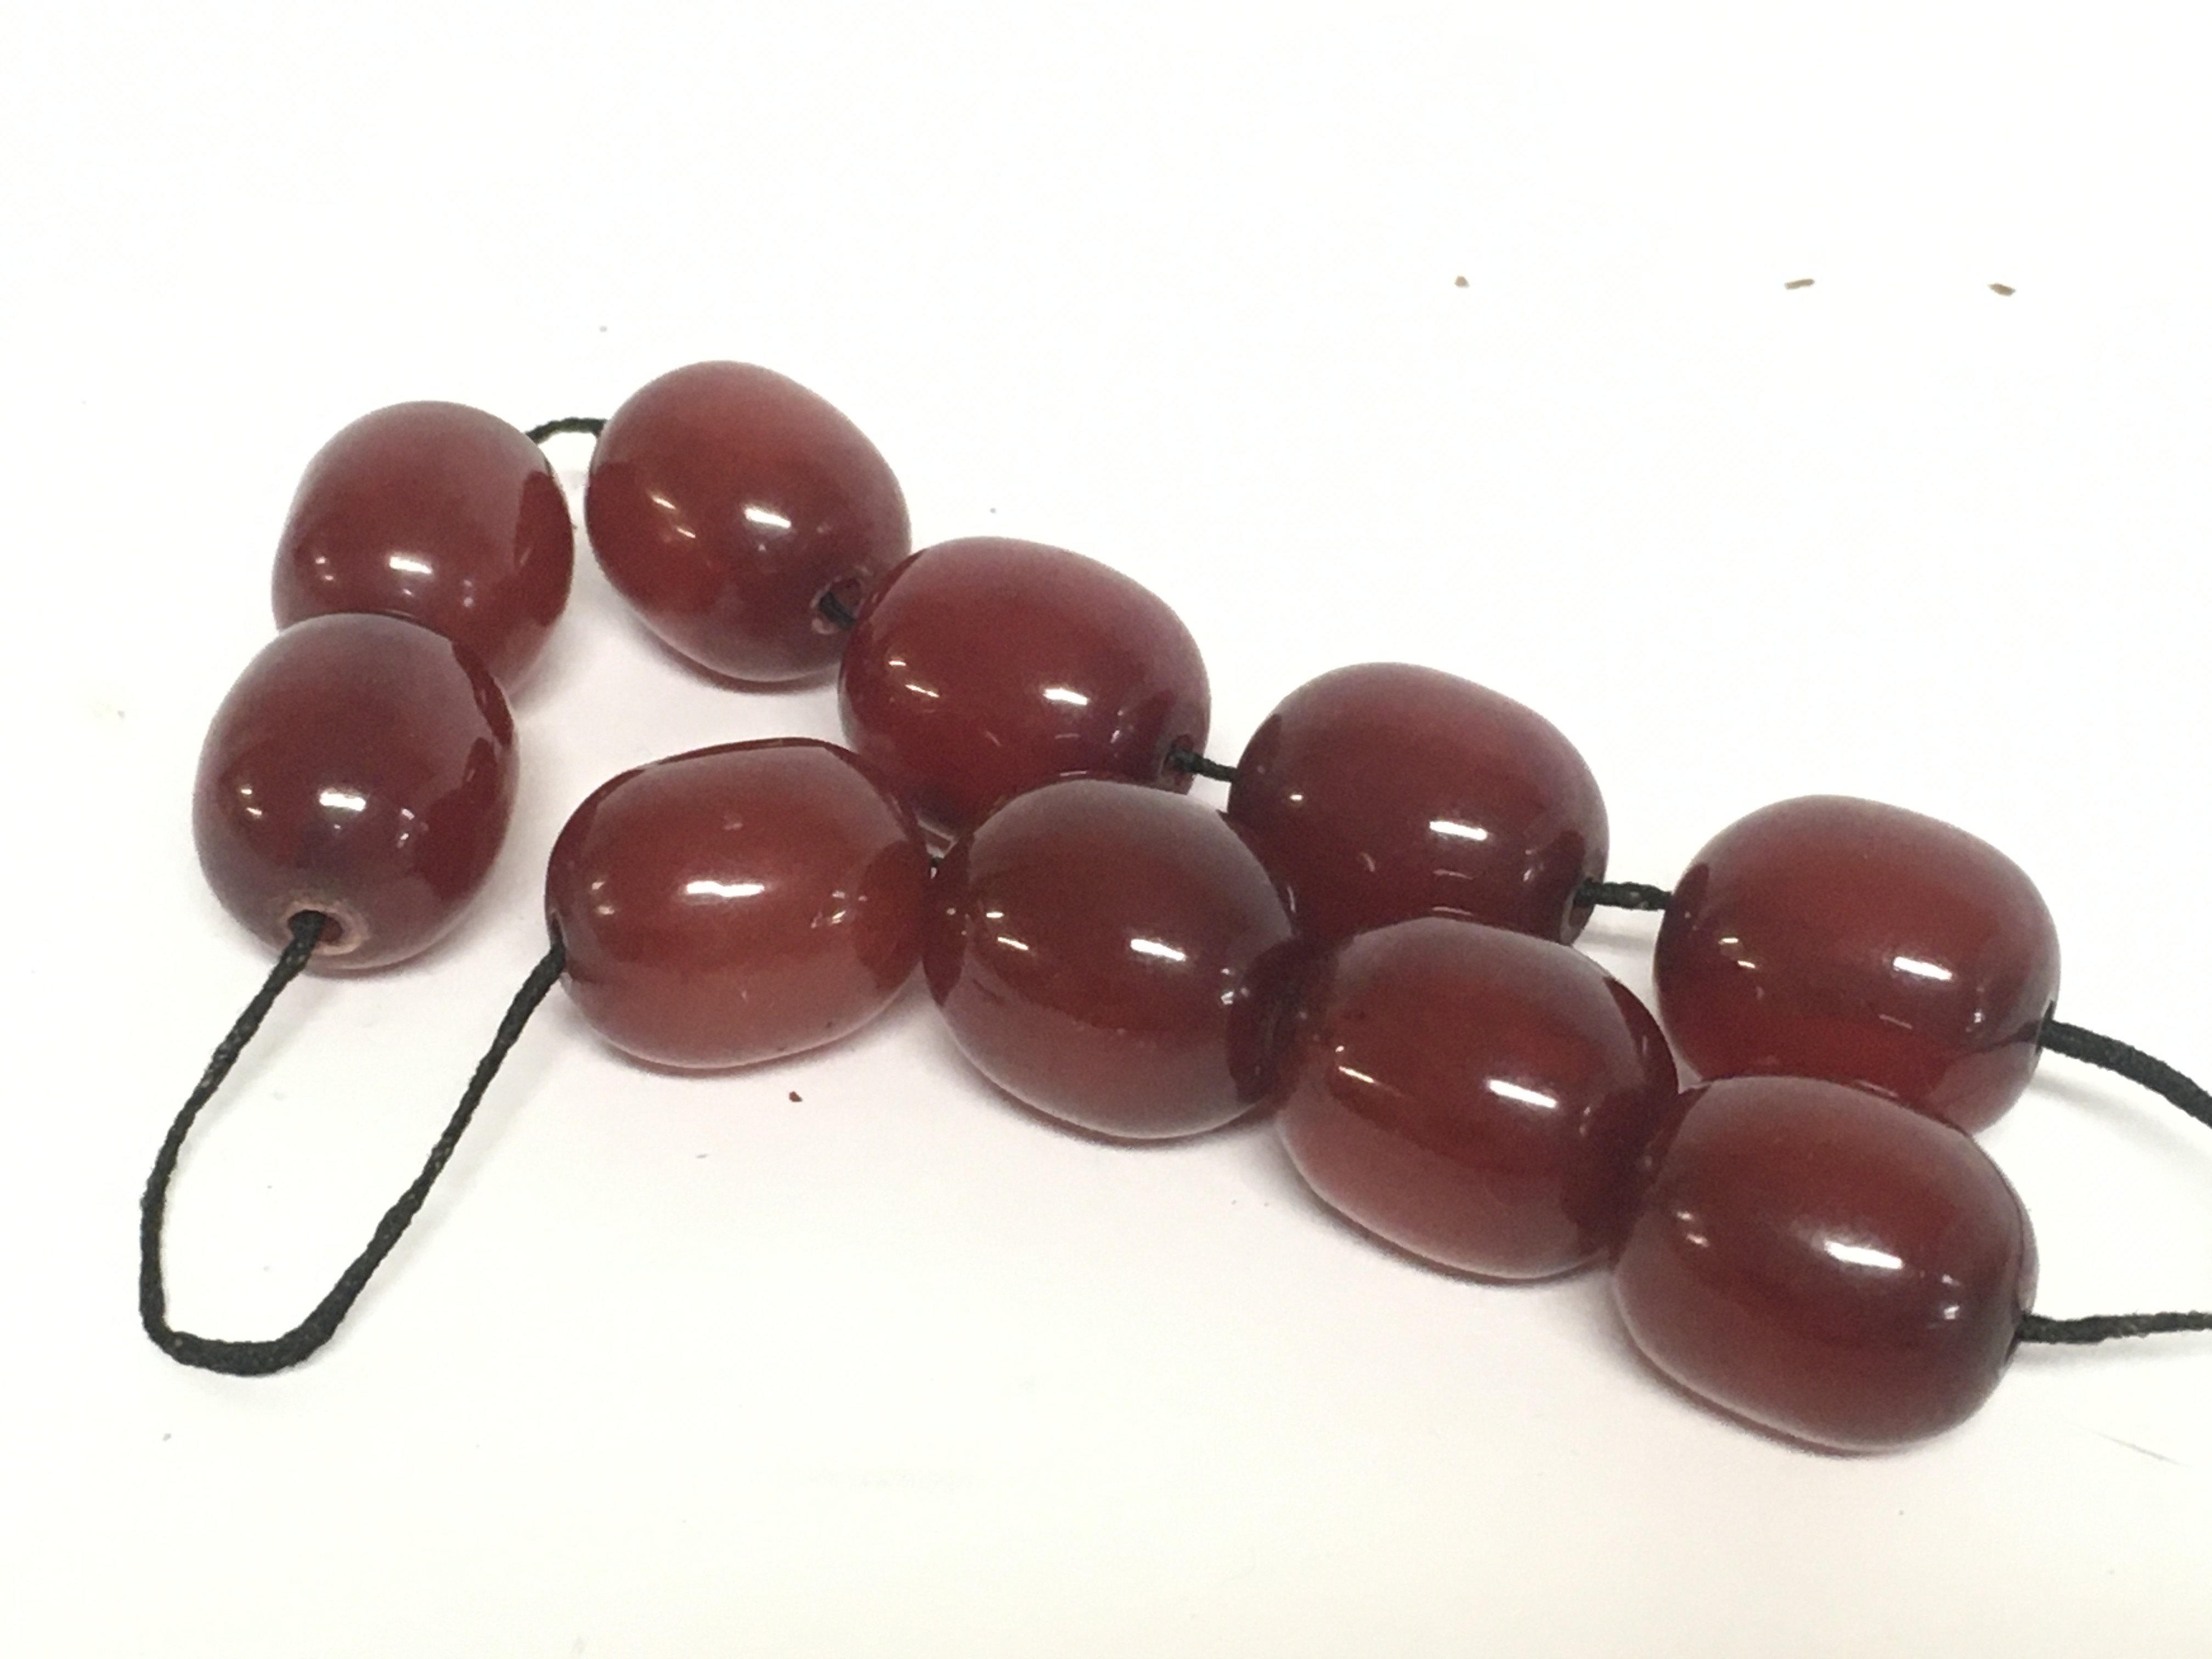 Cherry amber beads, 44g in total. Postage category